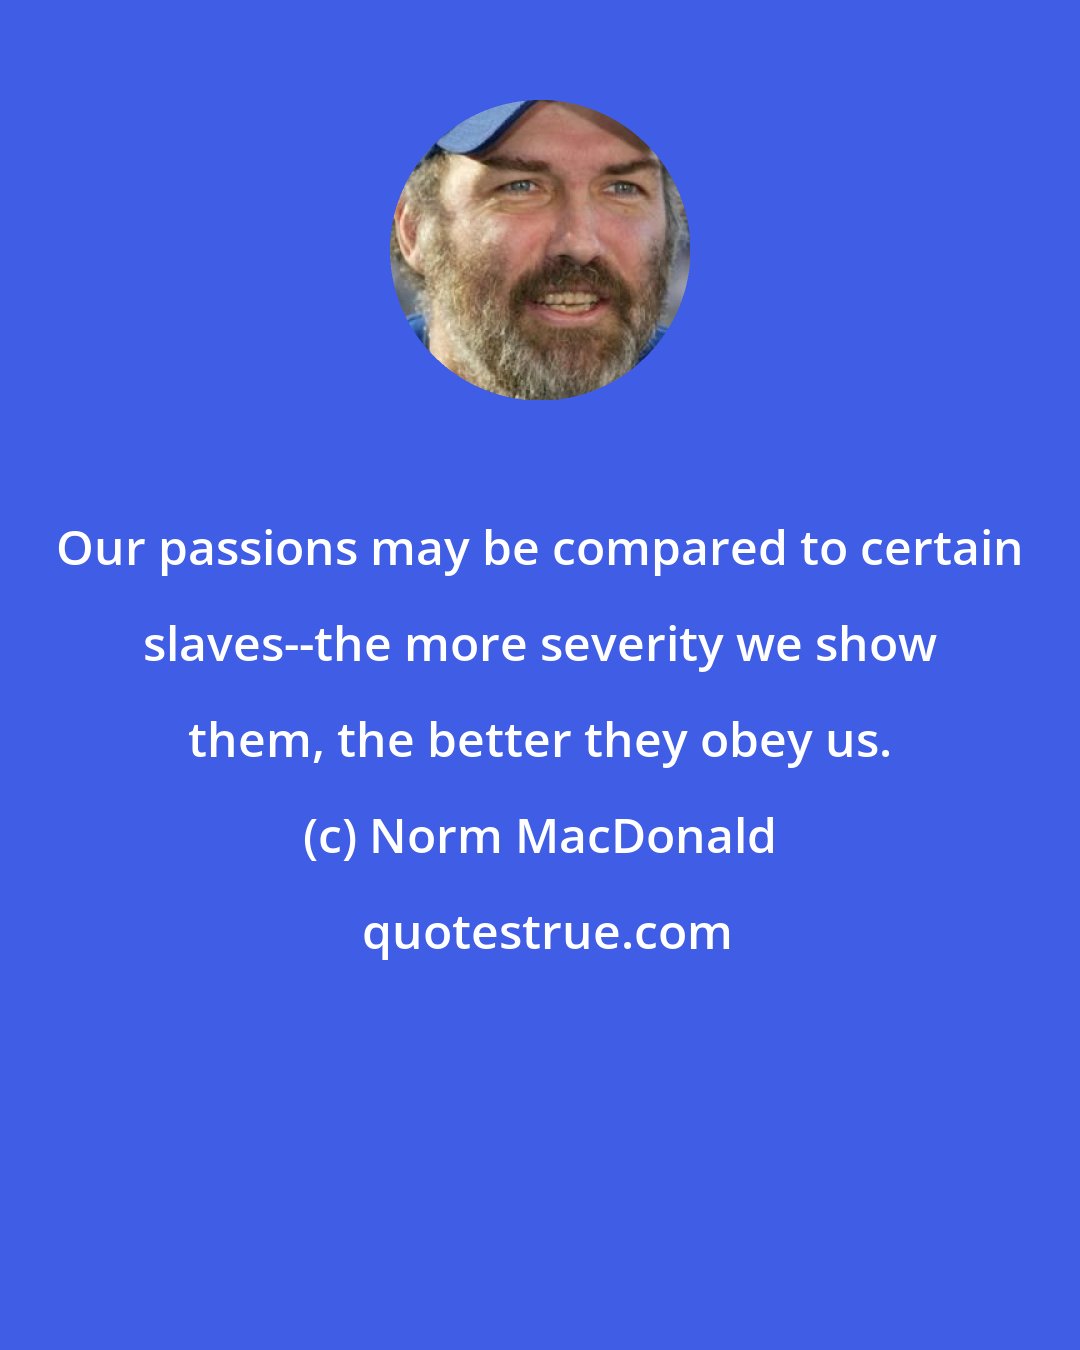 Norm MacDonald: Our passions may be compared to certain slaves--the more severity we show them, the better they obey us.